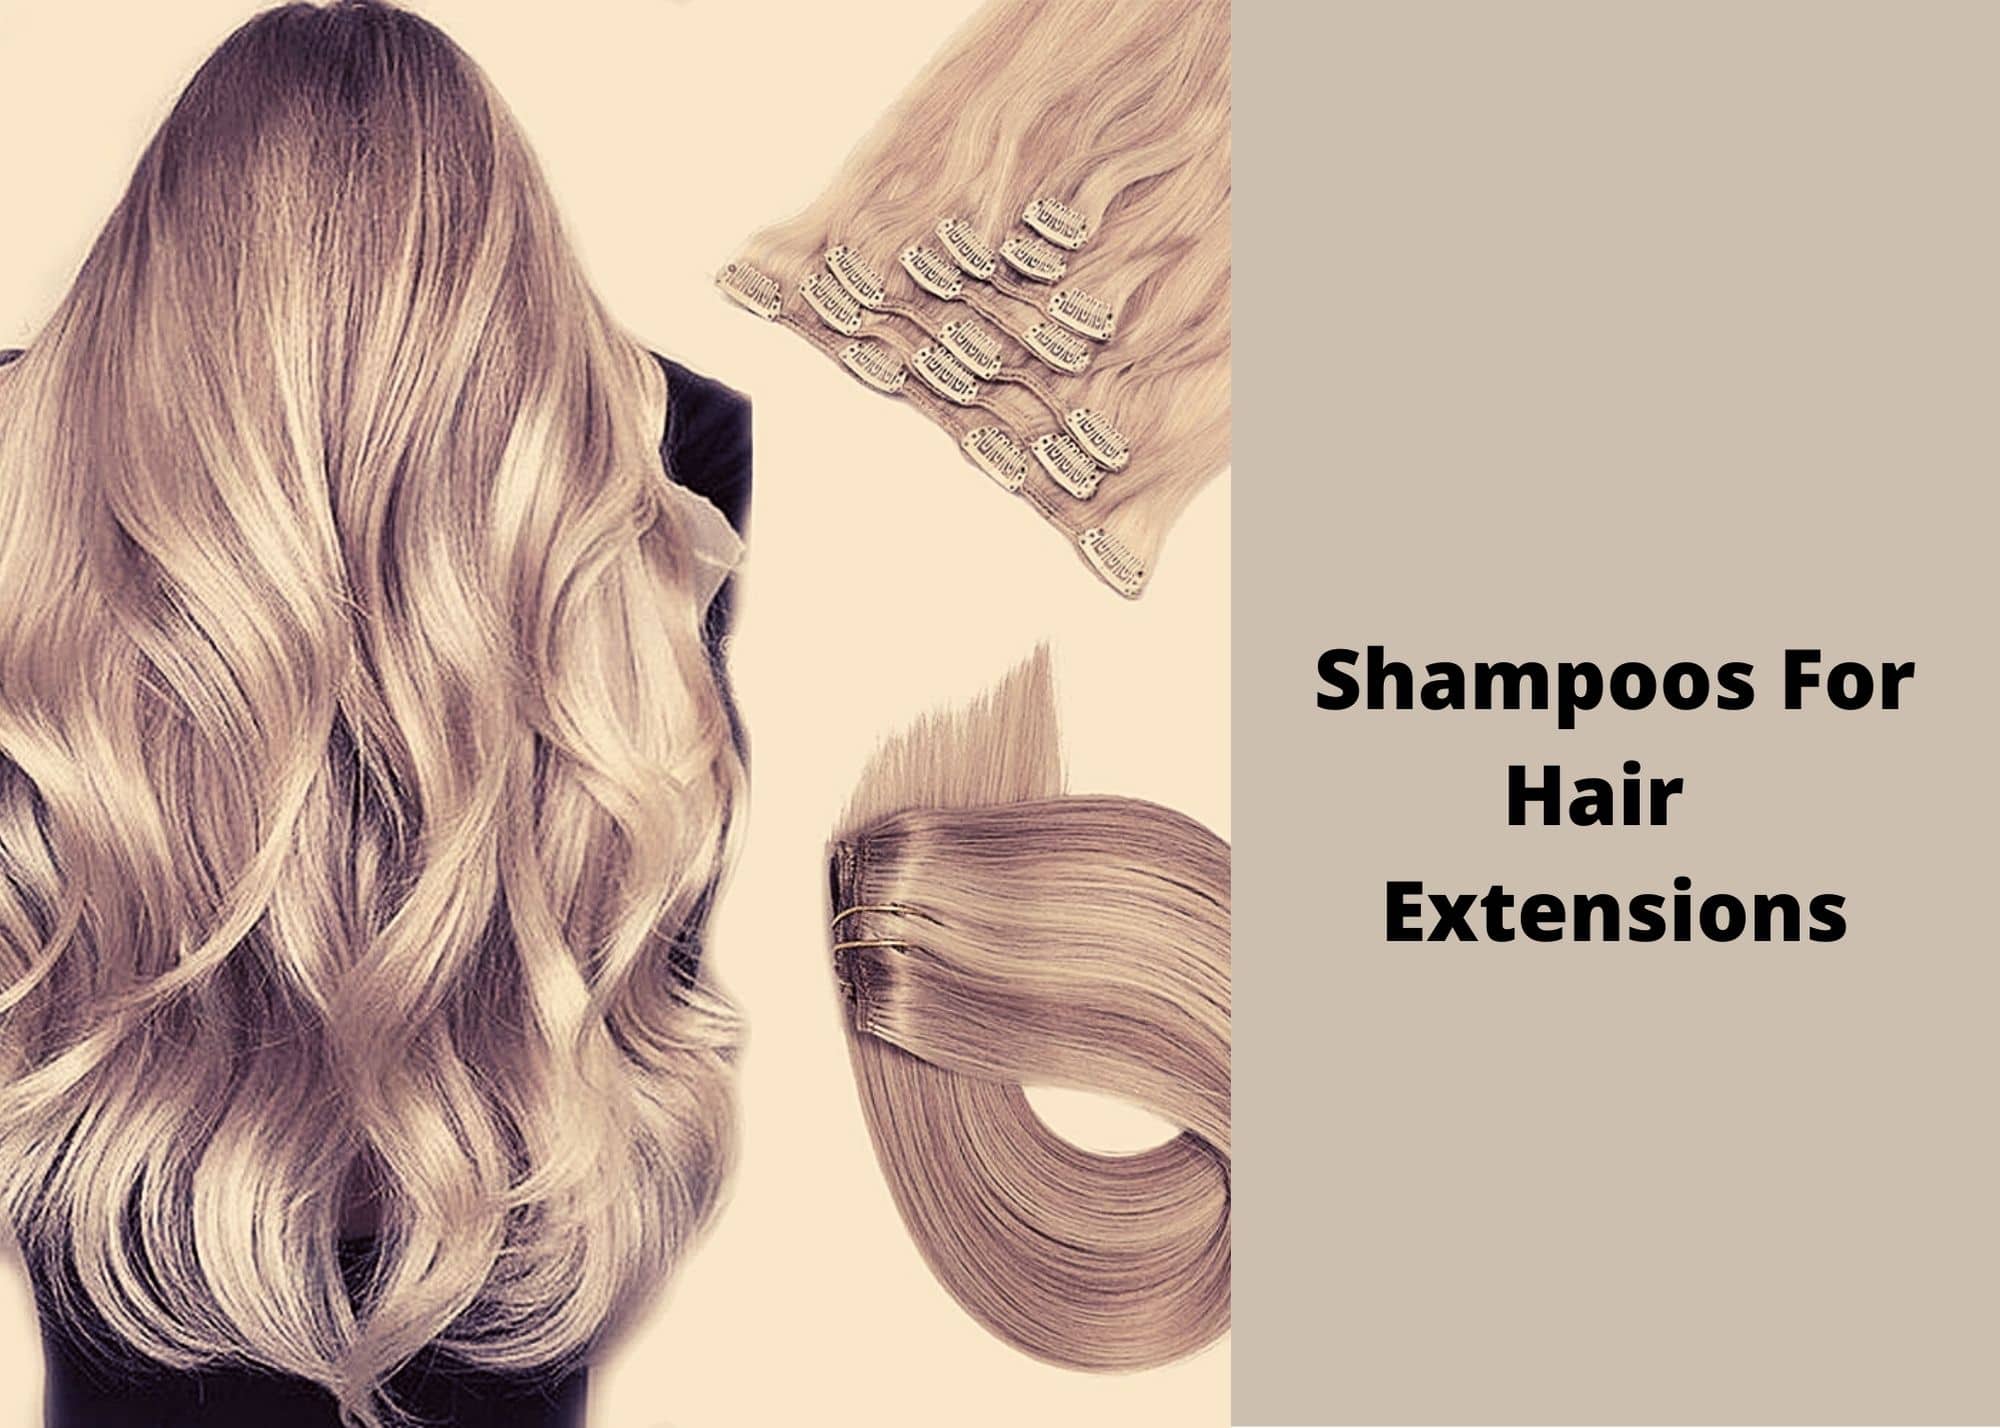 5 Best Shampoo For Hair Extensions In 2023 - Hair Everyday Review